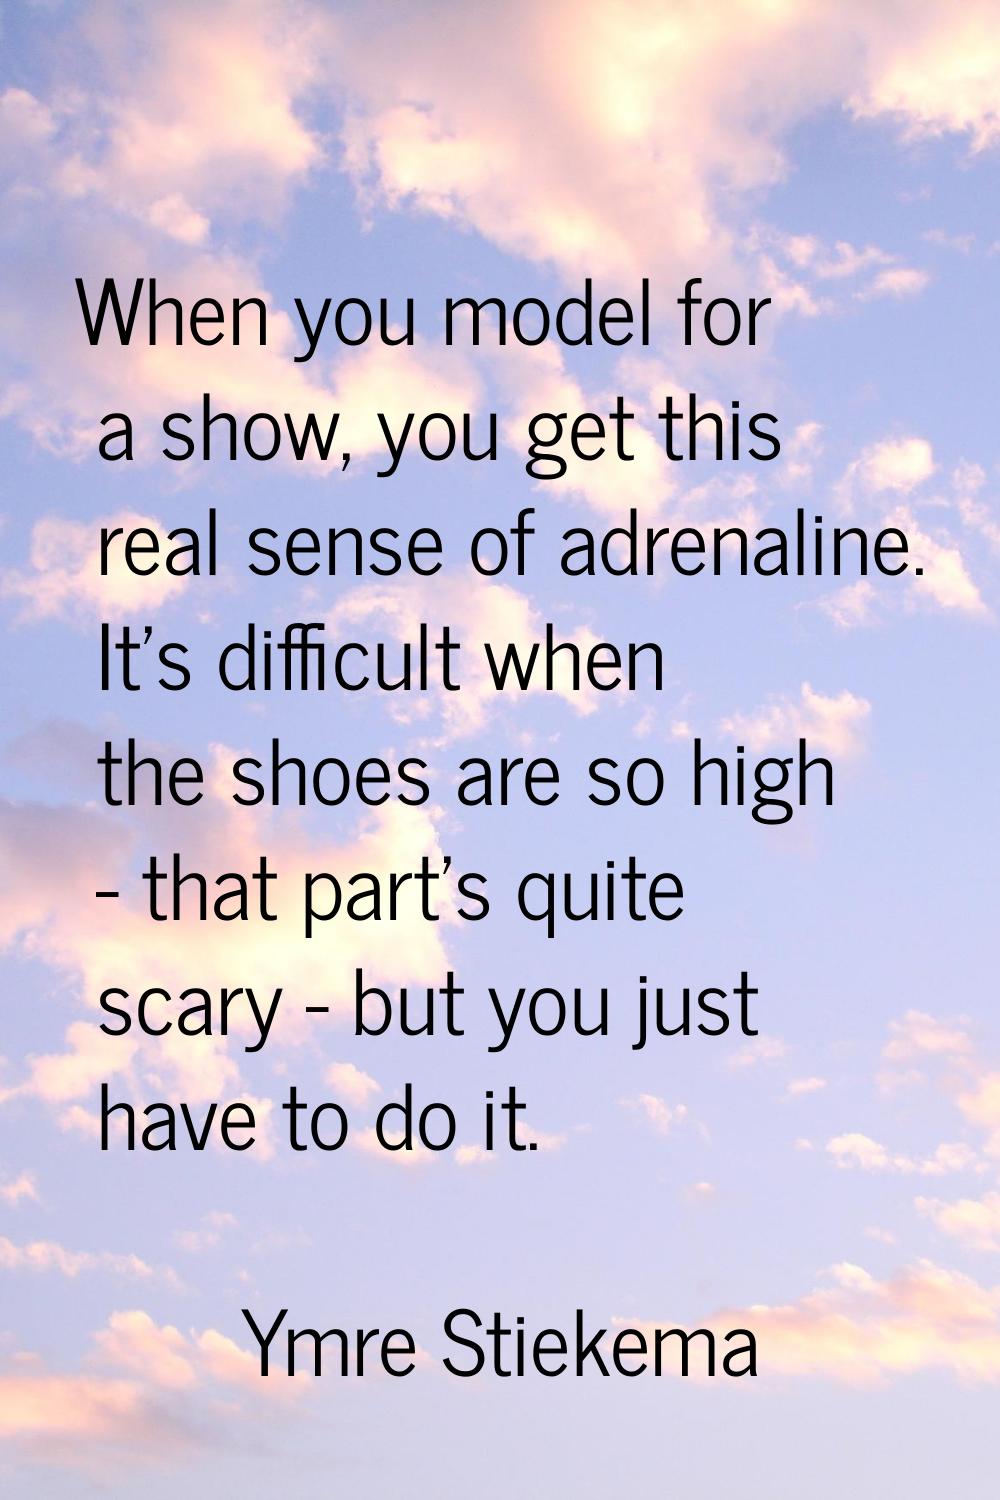 When you model for a show, you get this real sense of adrenaline. It's difficult when the shoes are